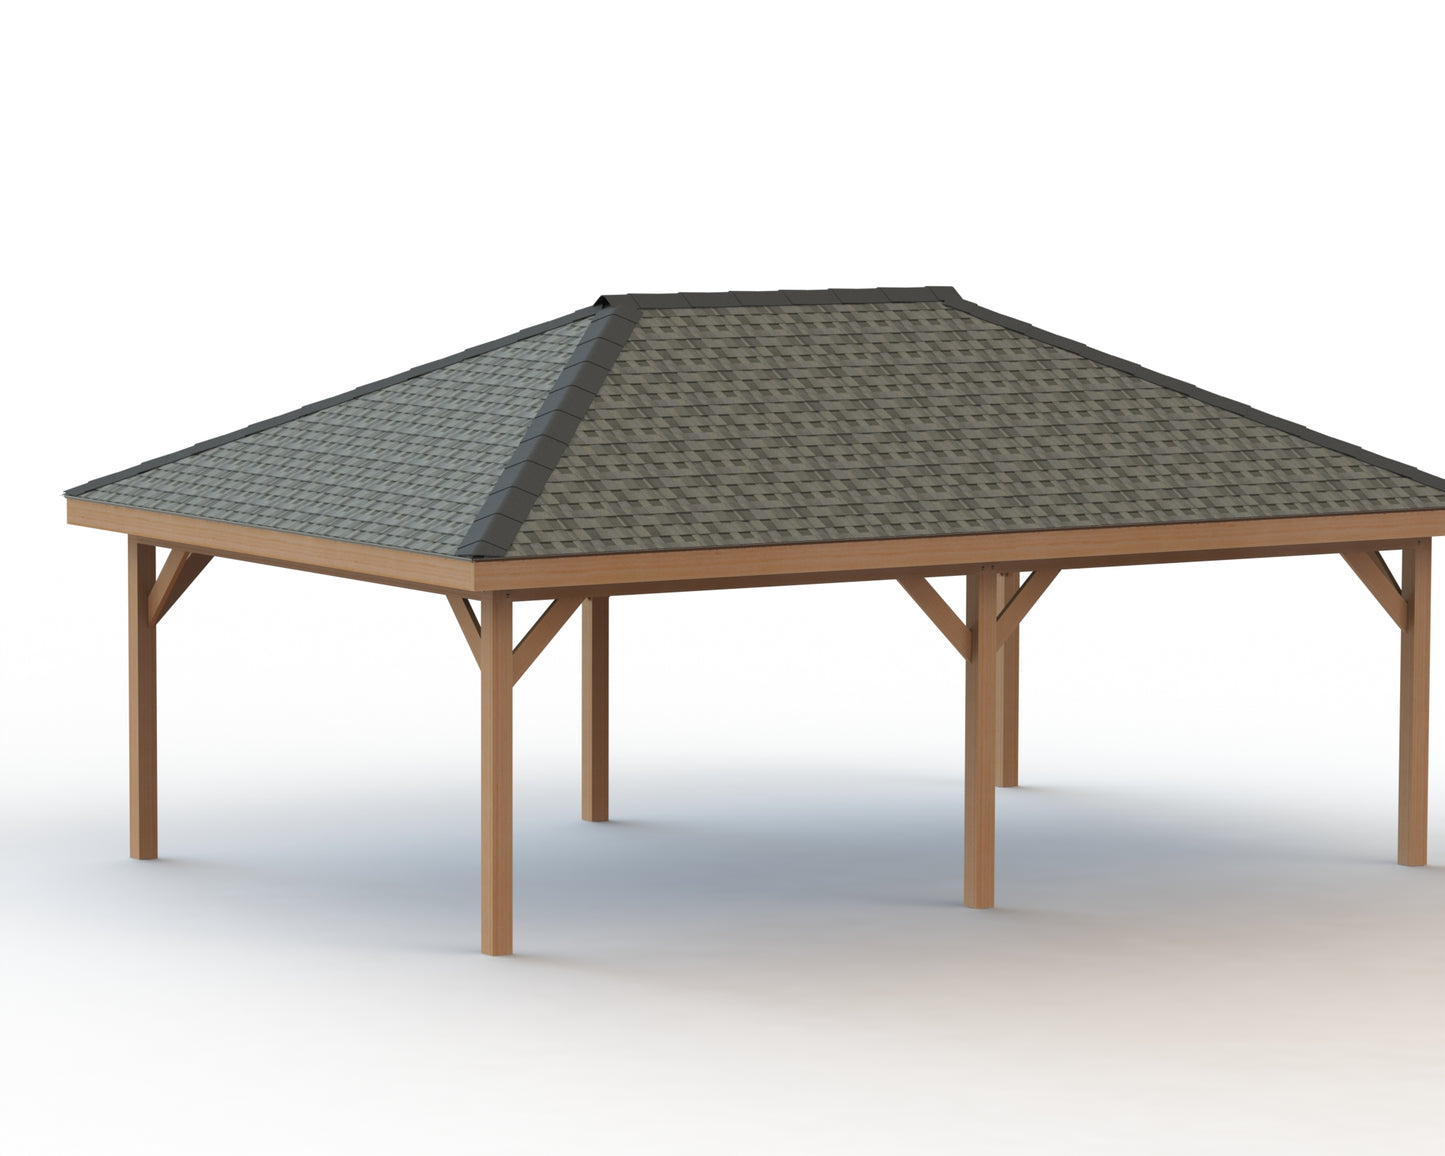 Hip Roof Gazebo Building Plans-Perfect for Hot Tubs - 14' x 18'